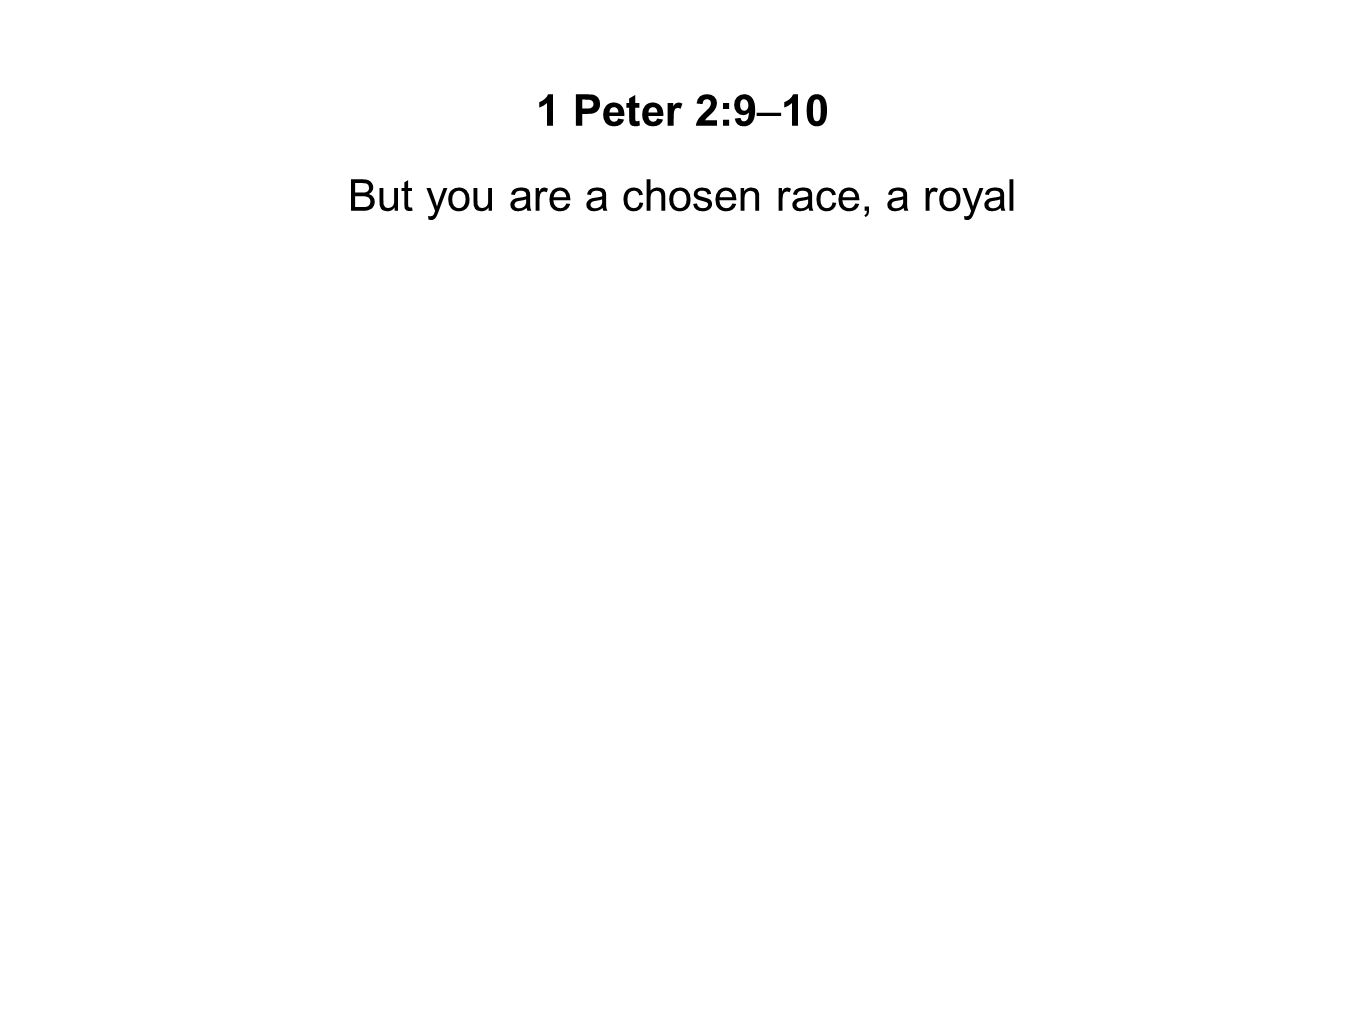 But you are a chosen race, a royal